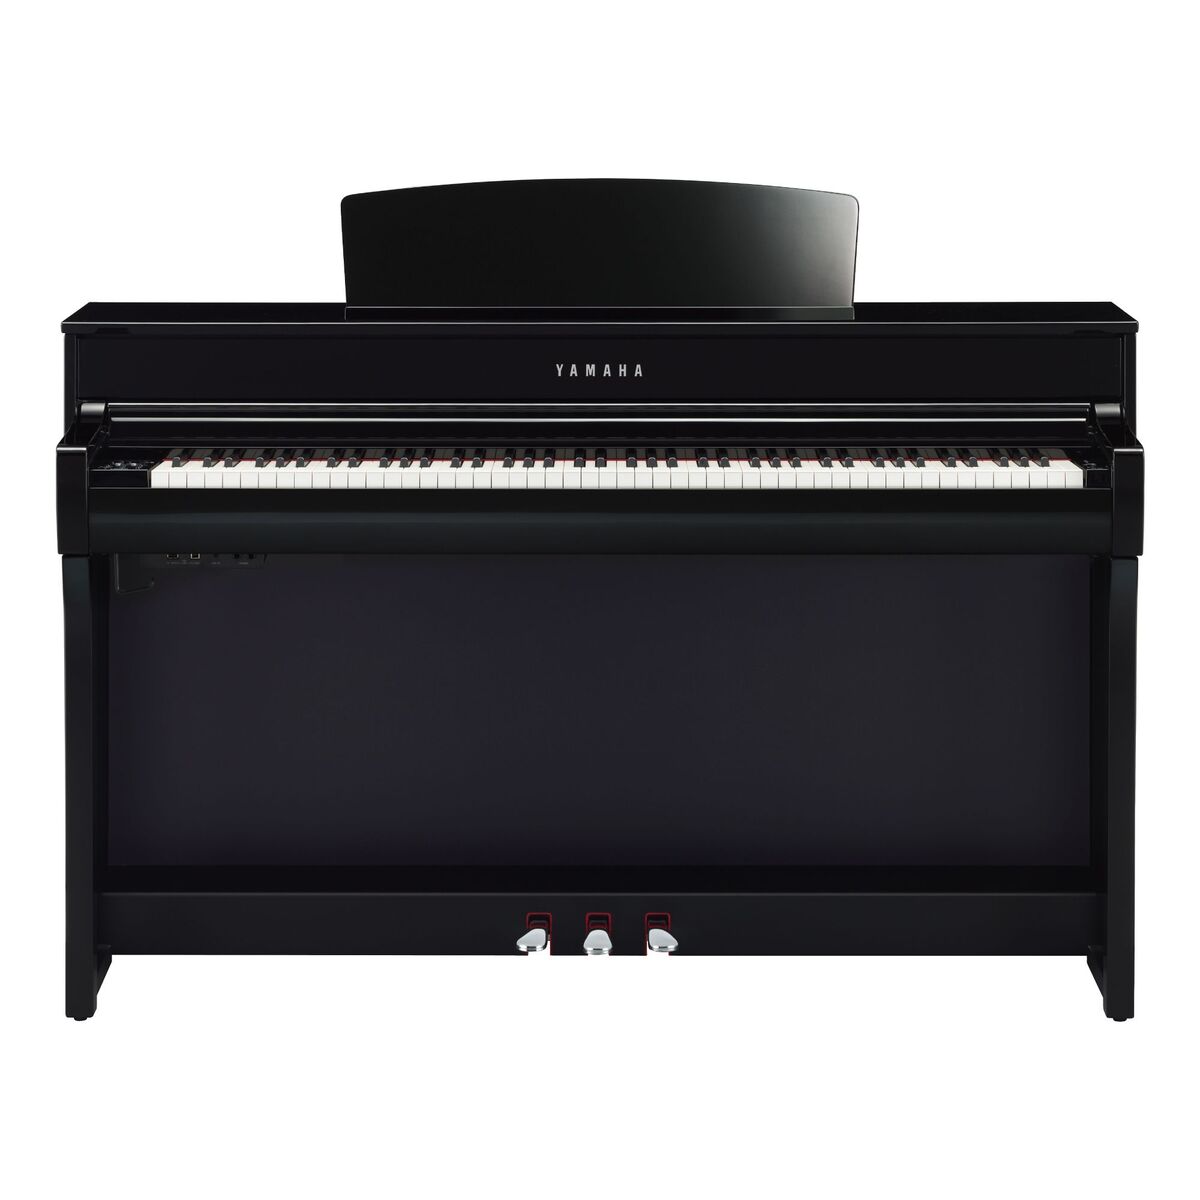 Yamaha Clavinova Digital Piano CLP-745 Grand Touch-S Wooden Keyboard, 38 voices including CFX and Boesendorfer sound, 20 Rhythm Patterns, 16 Track Recording, Black